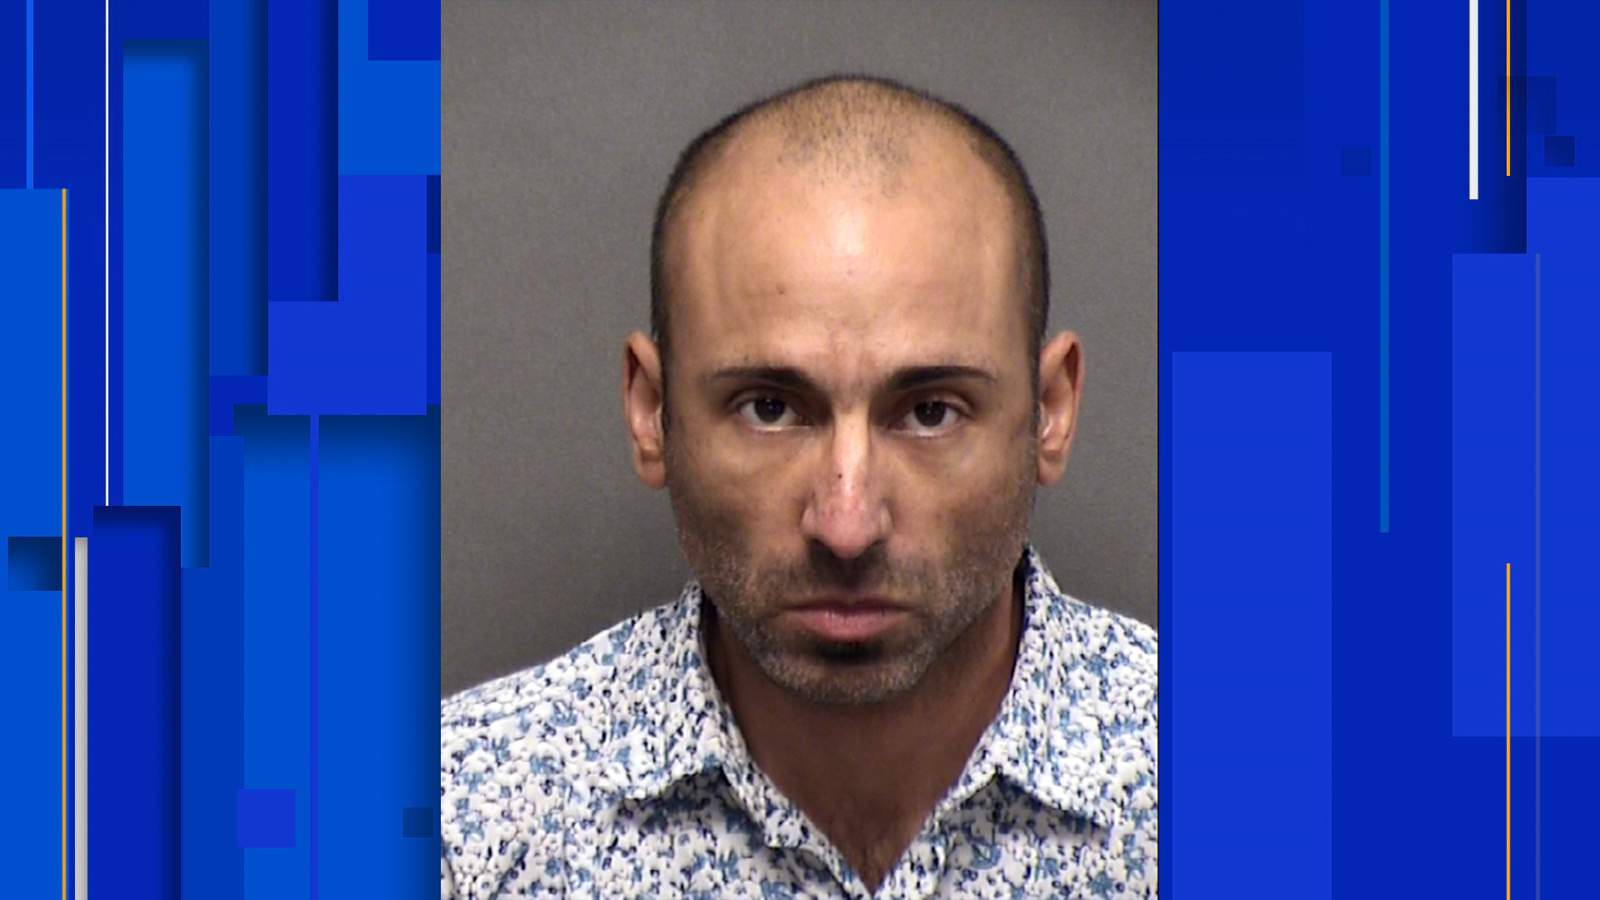 Man charged with possession of child porn, bestiality after disturbing videos found on laptop at pawn shop, police say